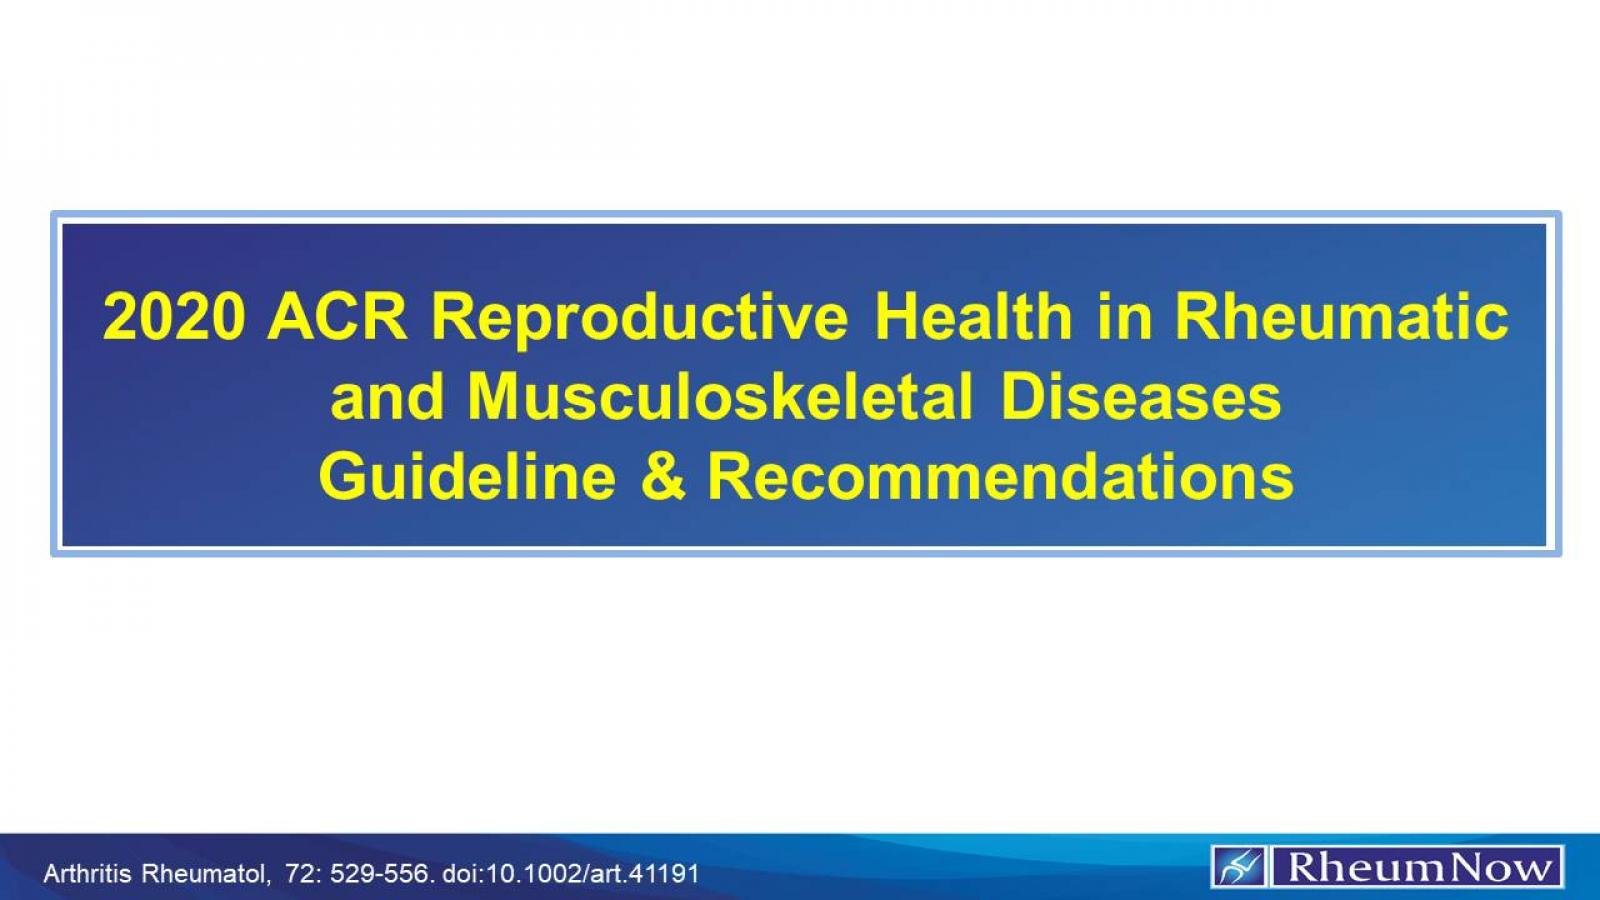 Reproductive Guidelines ACR